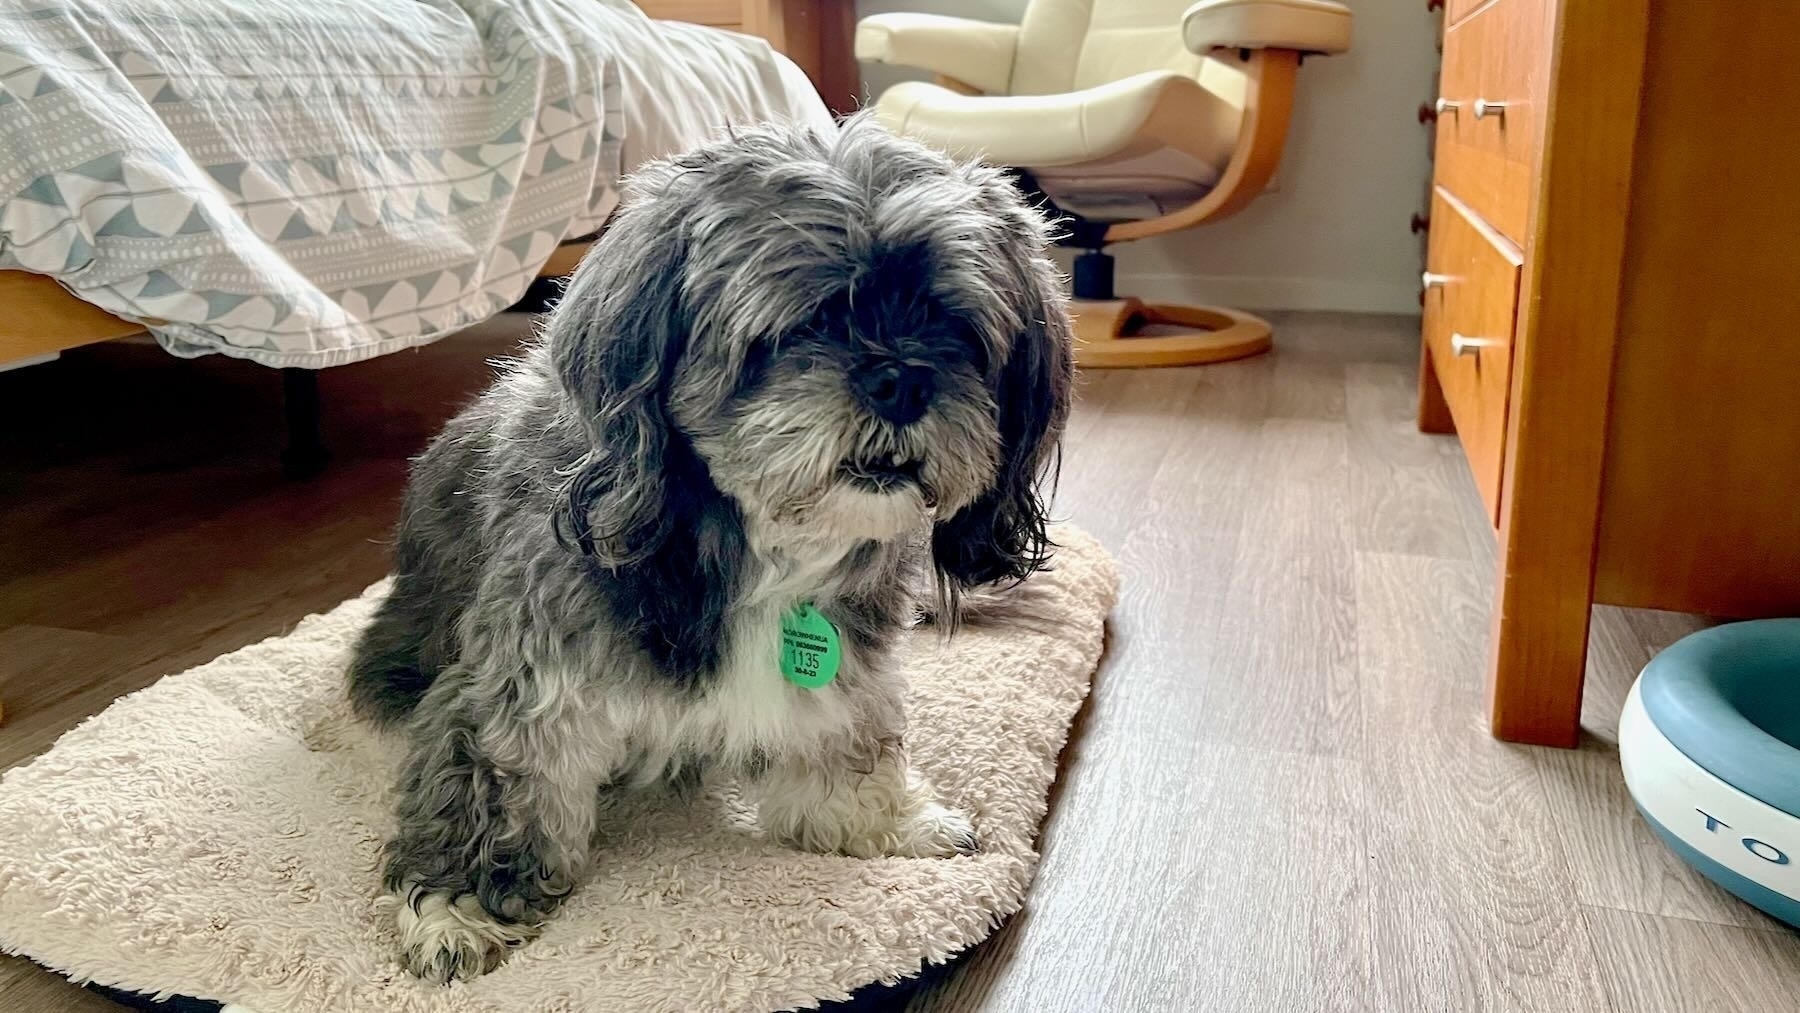 Small elderly greying dog on a rug, looking roughly towards the camera. 